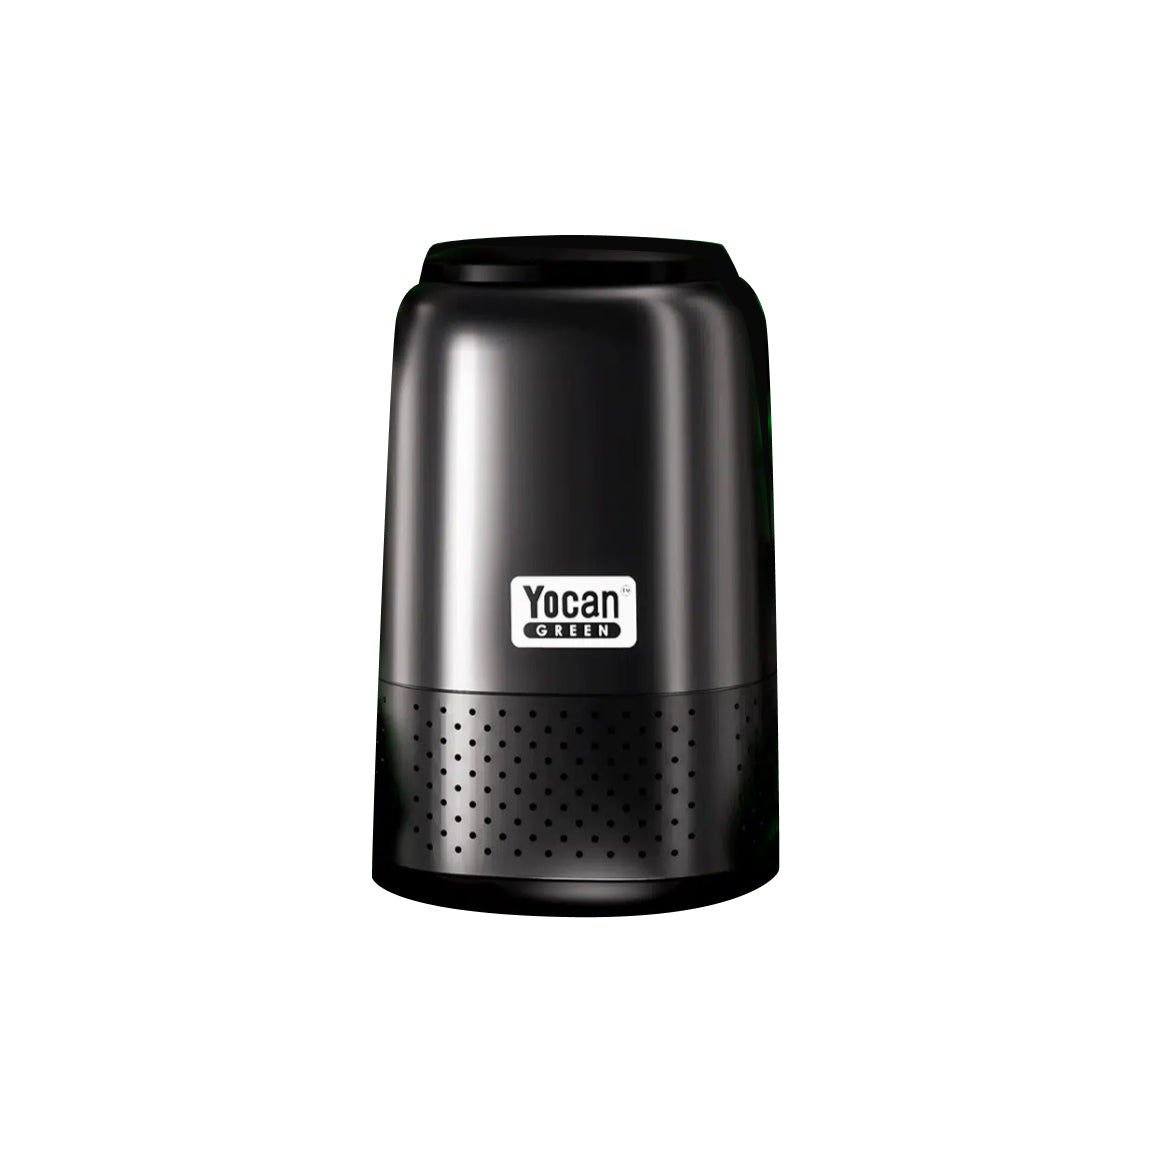 Yocan Green Invisibility Cloak Personal Air Filter - black